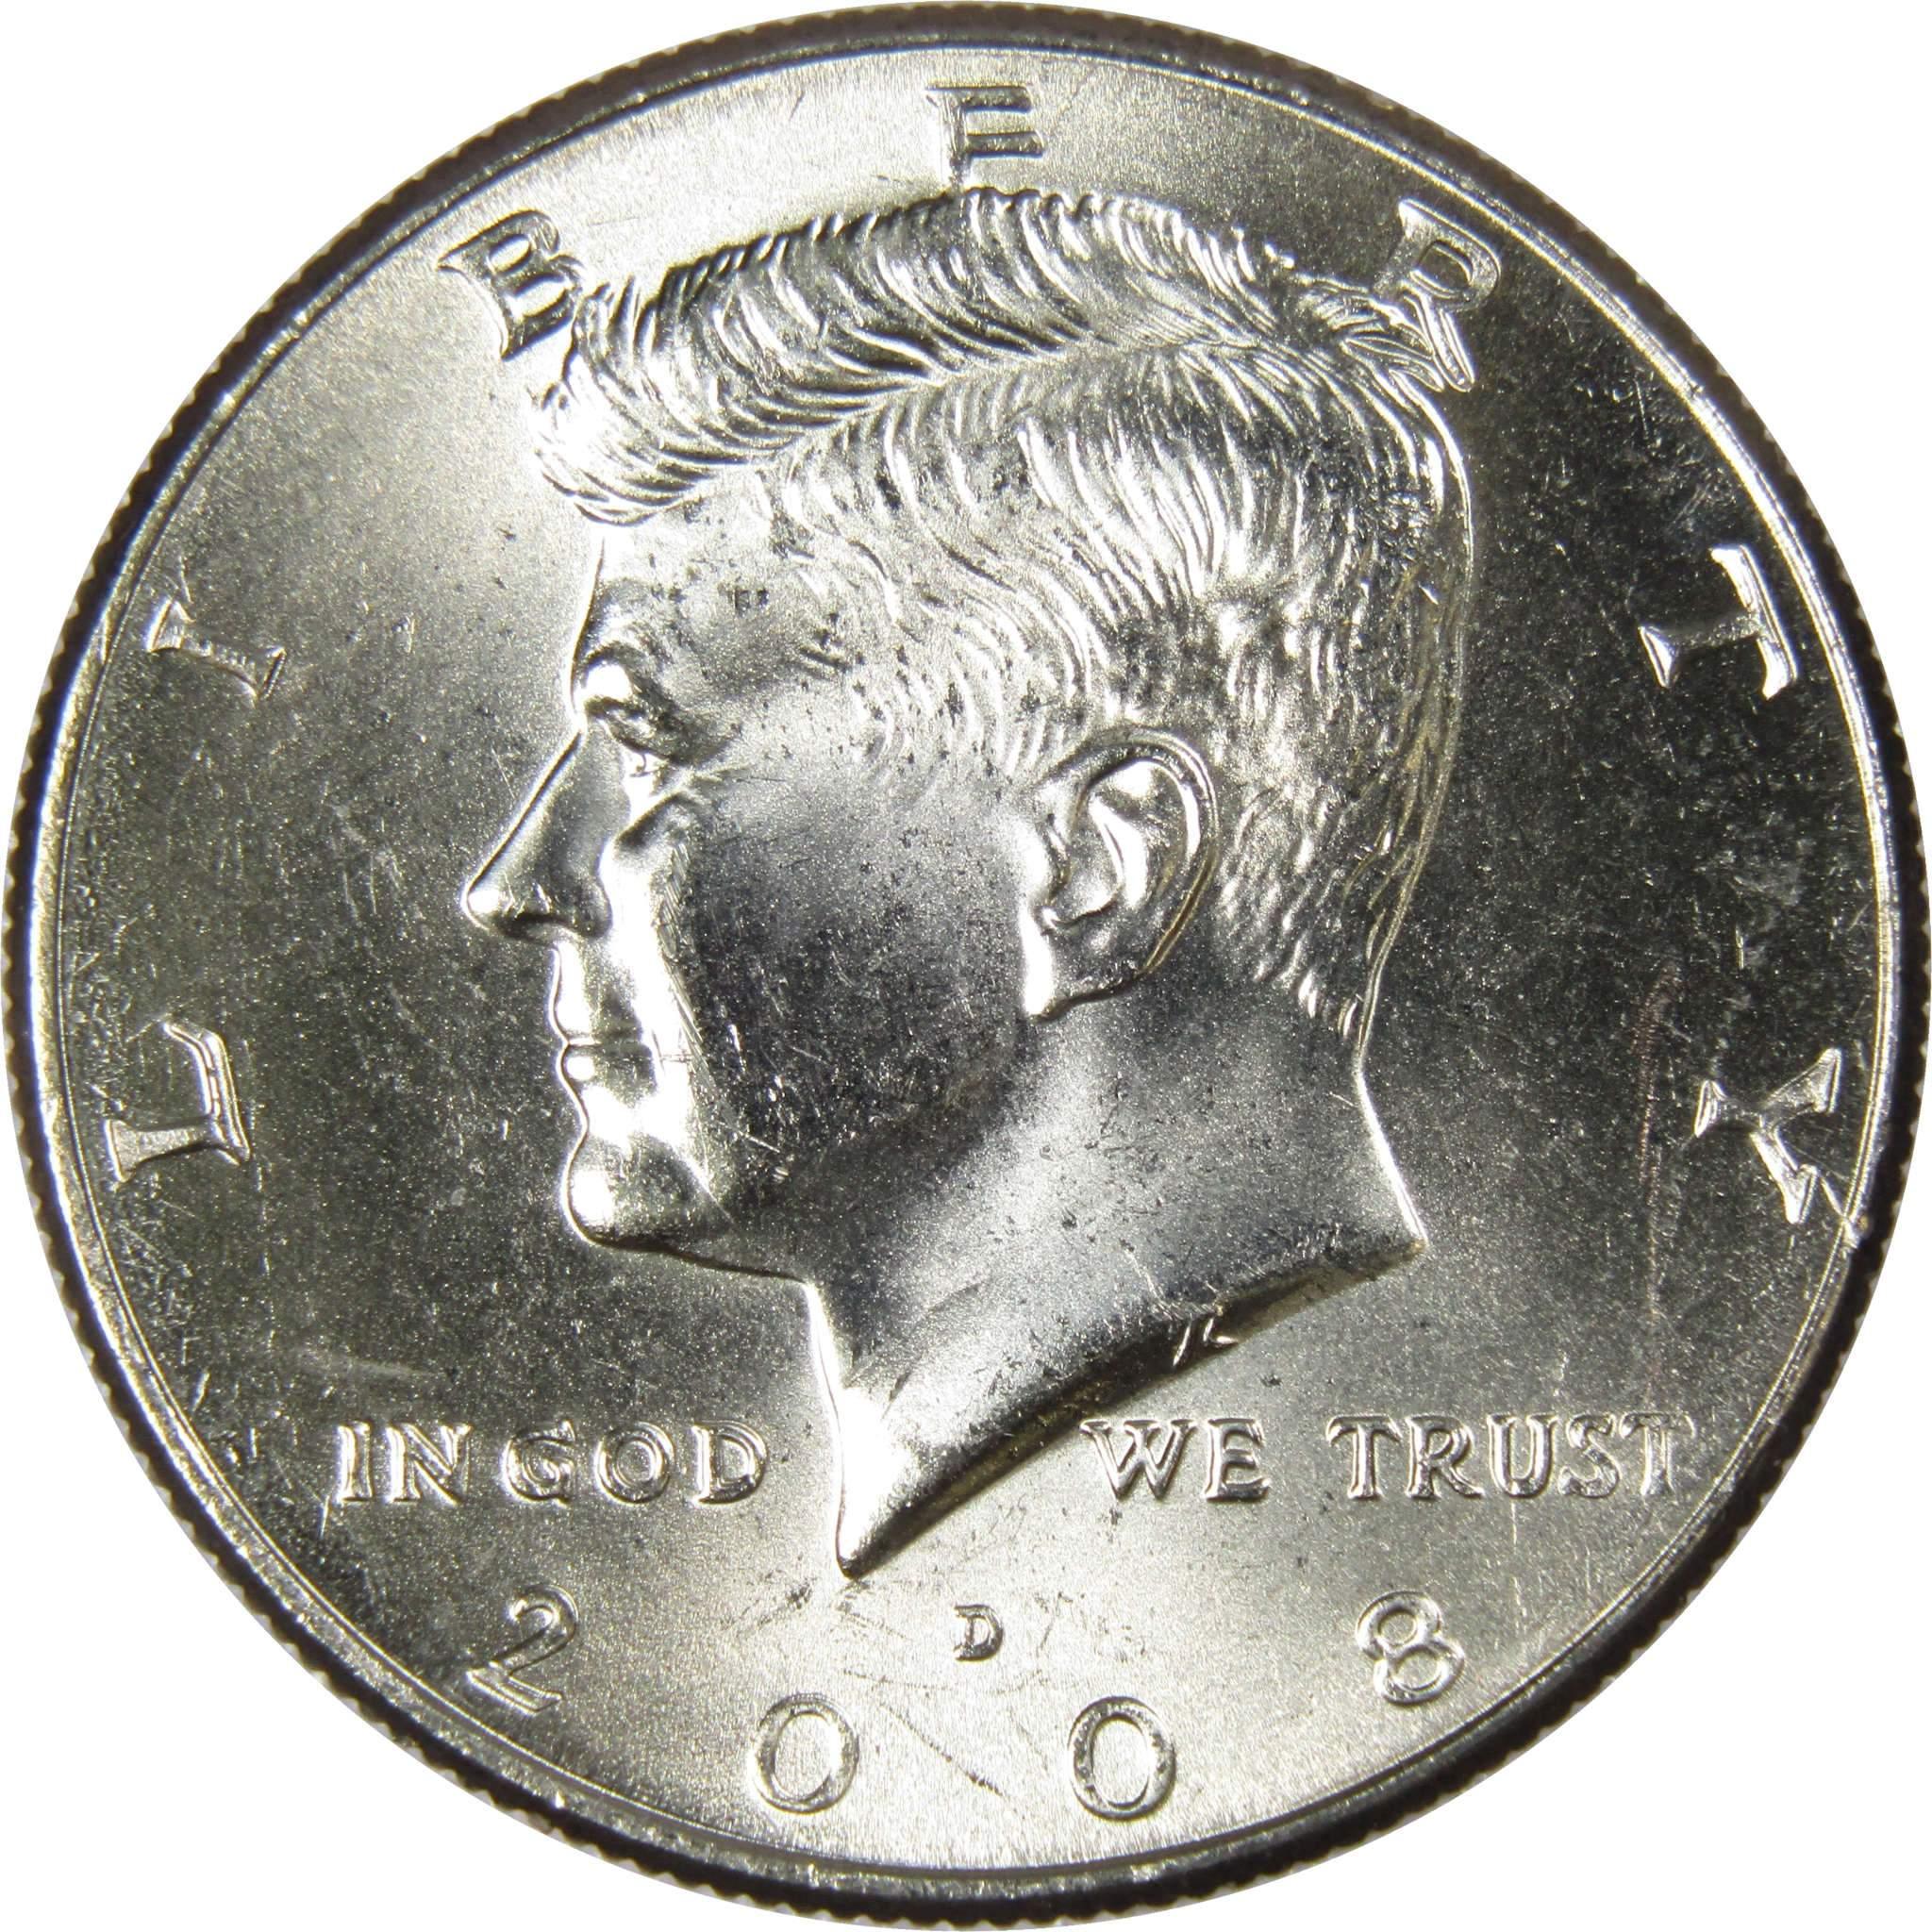 2008 D Kennedy Half Dollar BU Uncirculated Mint State 50c US Coin Collectible